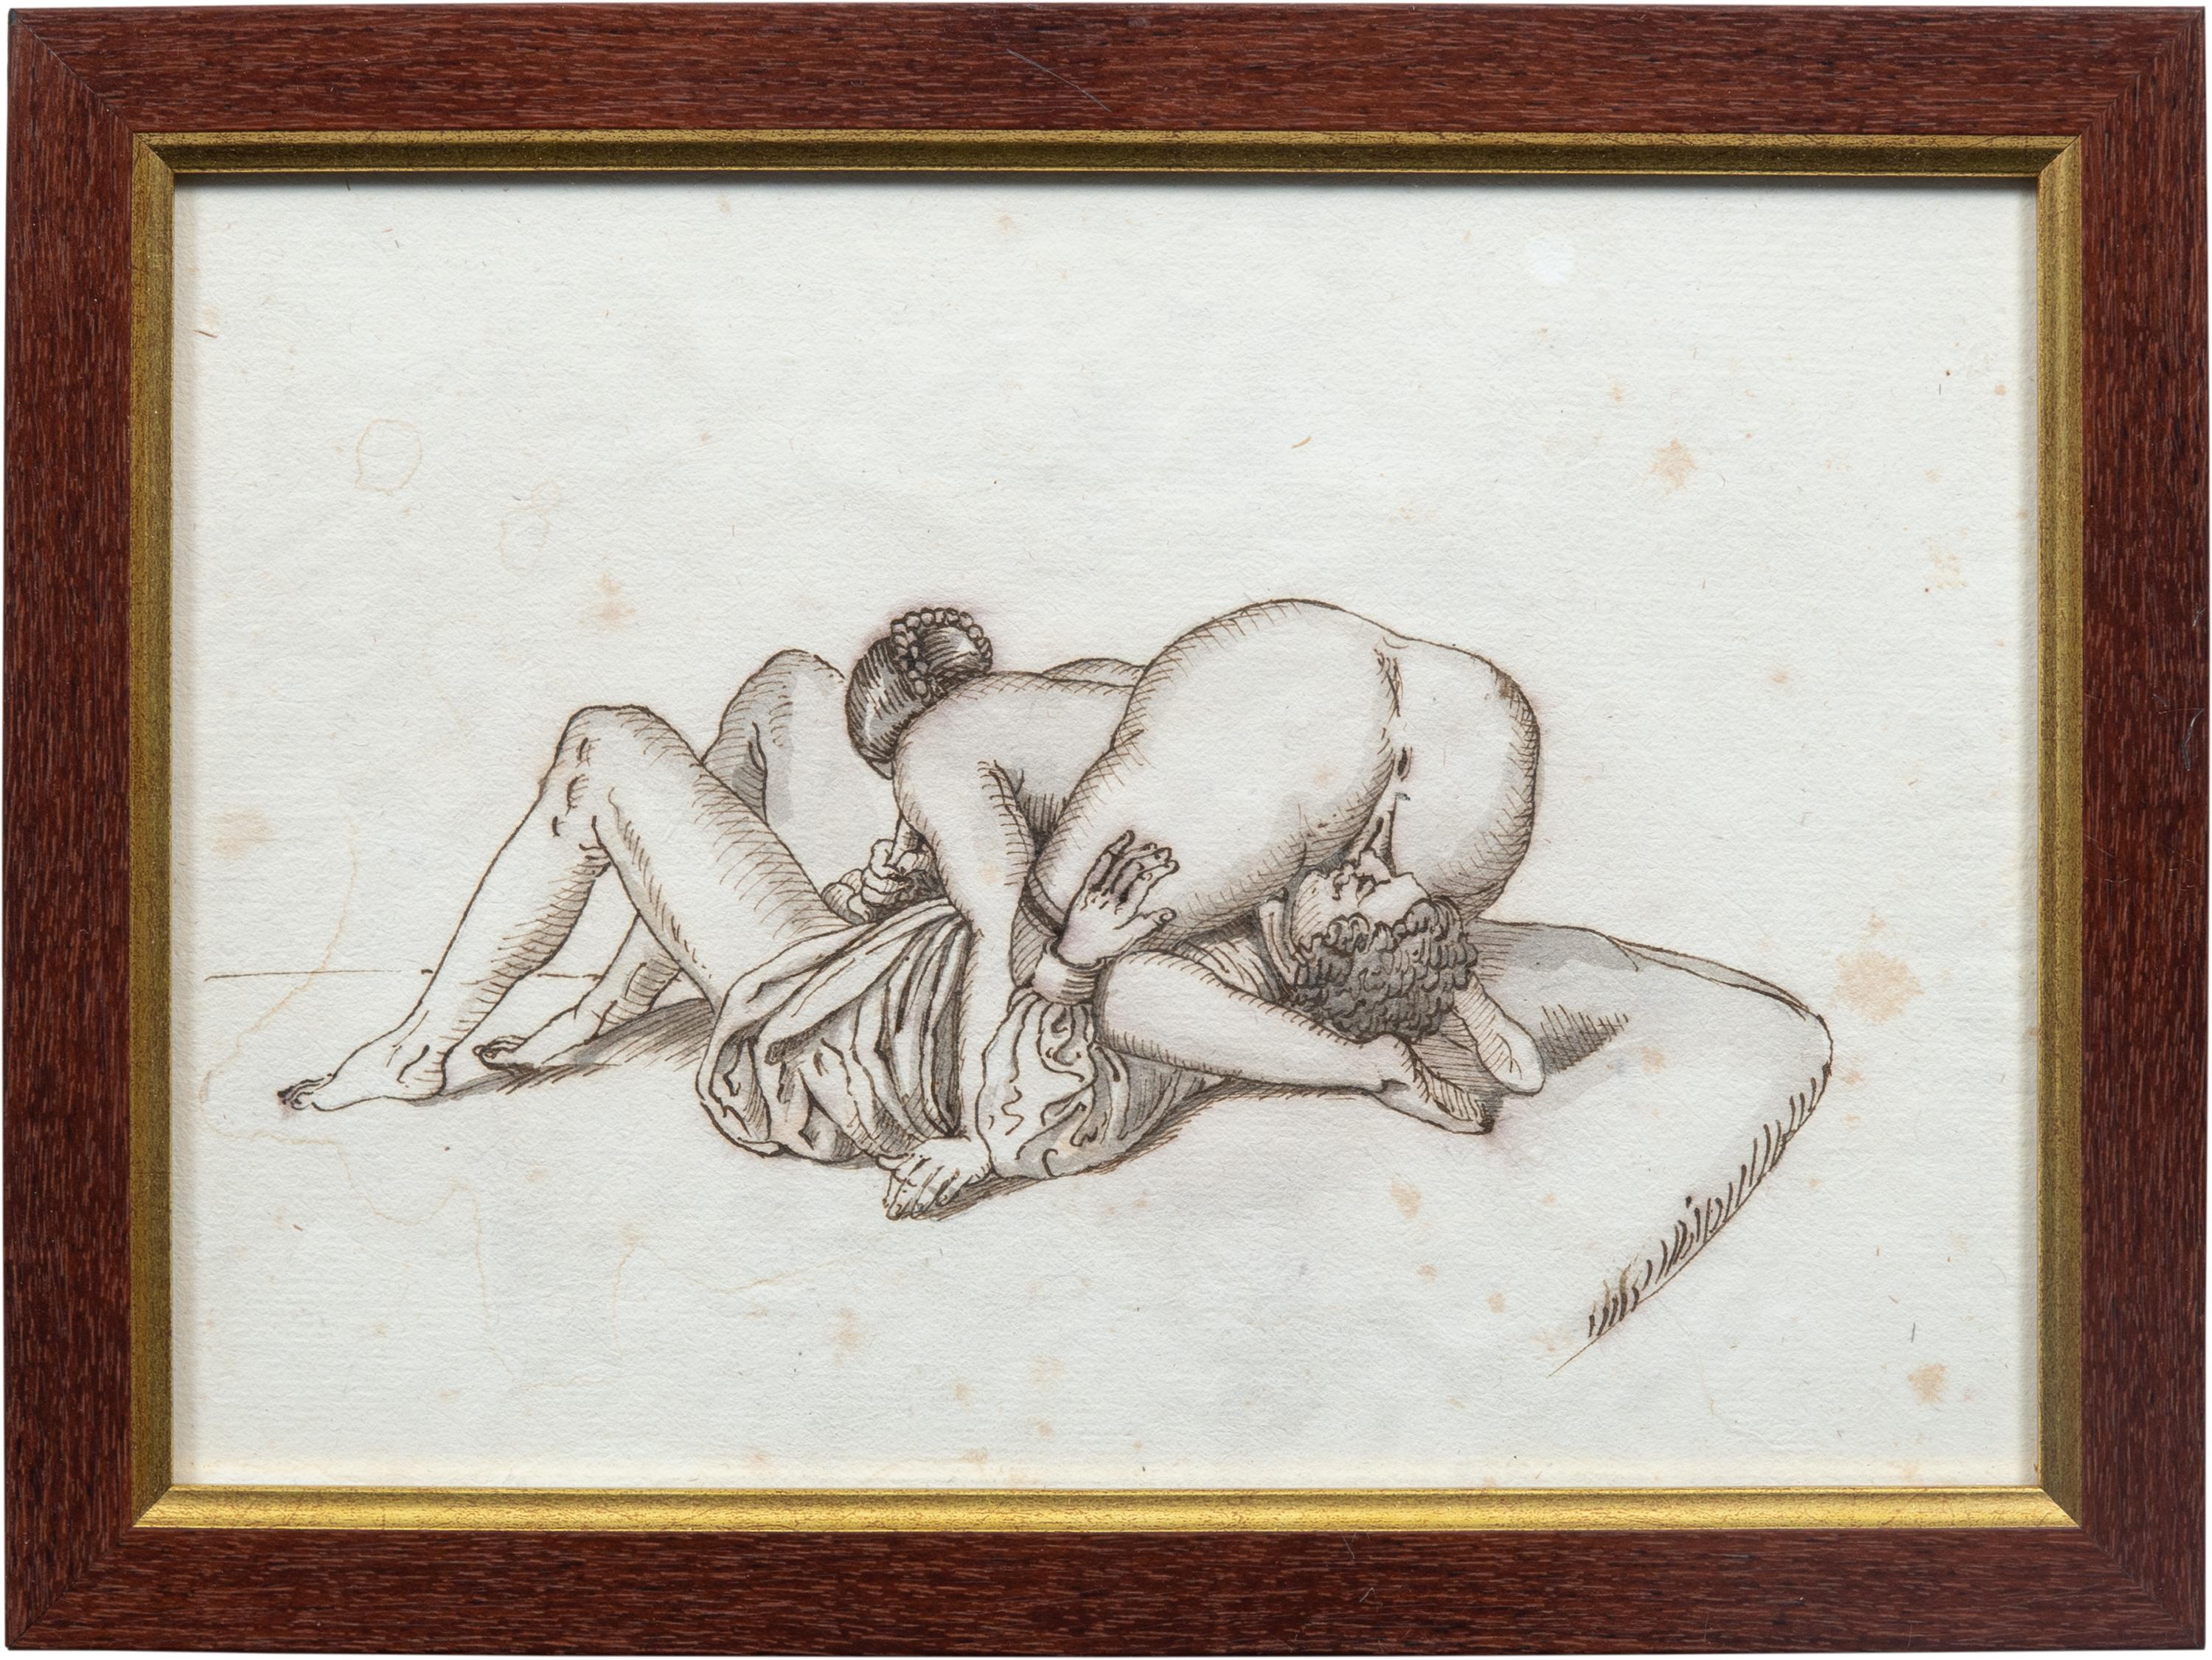 Erotic French painter - 19th century figure drawings - Nudes - Ink on paper - Old Masters Art by Unknown